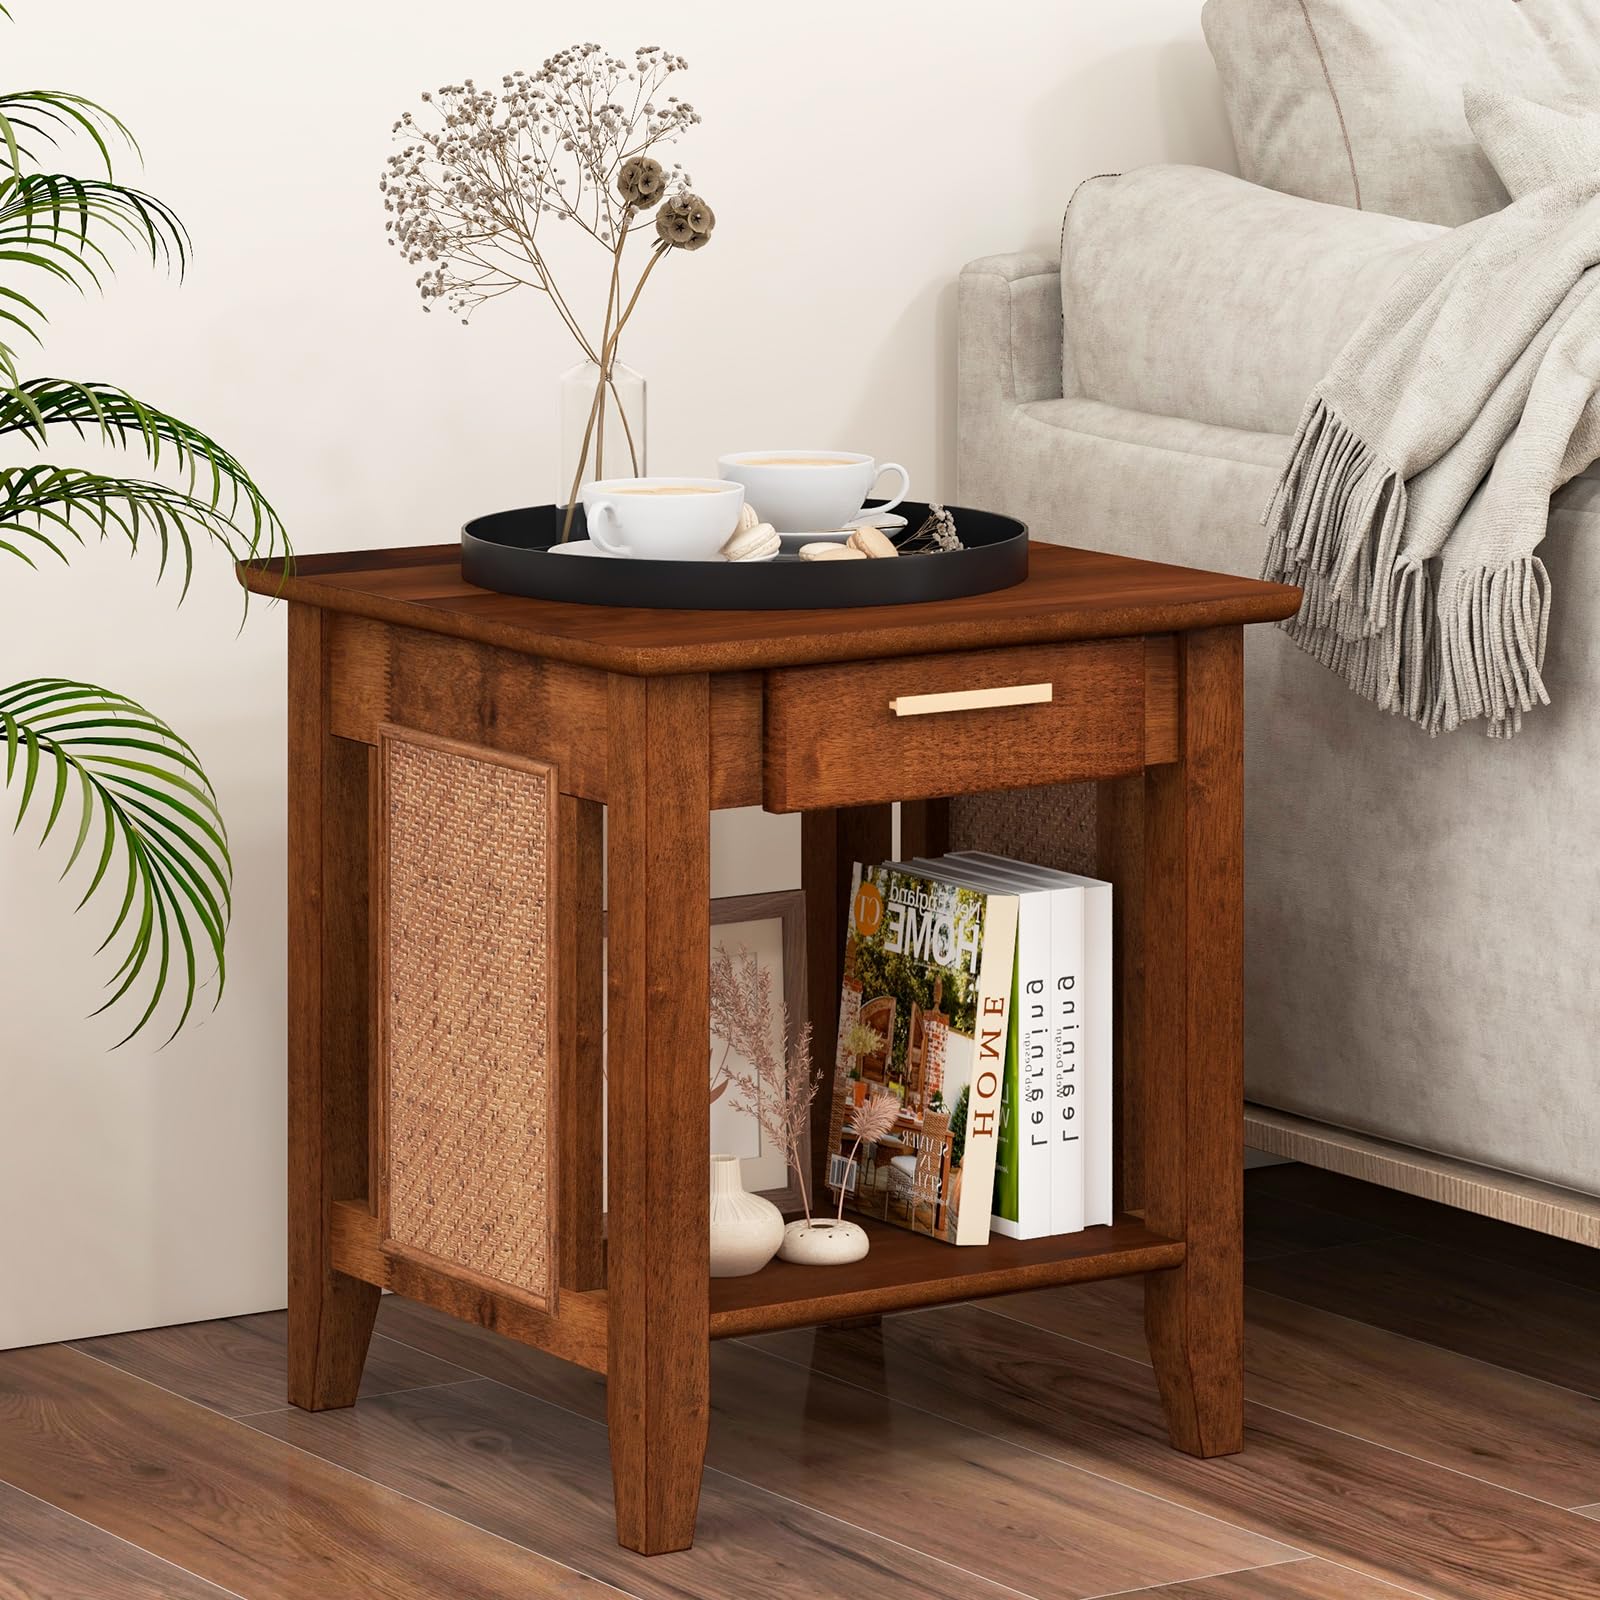 Giantex Rattan Nightstand with Drawer, Mid Century End Table with Storage Shelf, Sofa Side Table with Solid Rubber Wood Legs